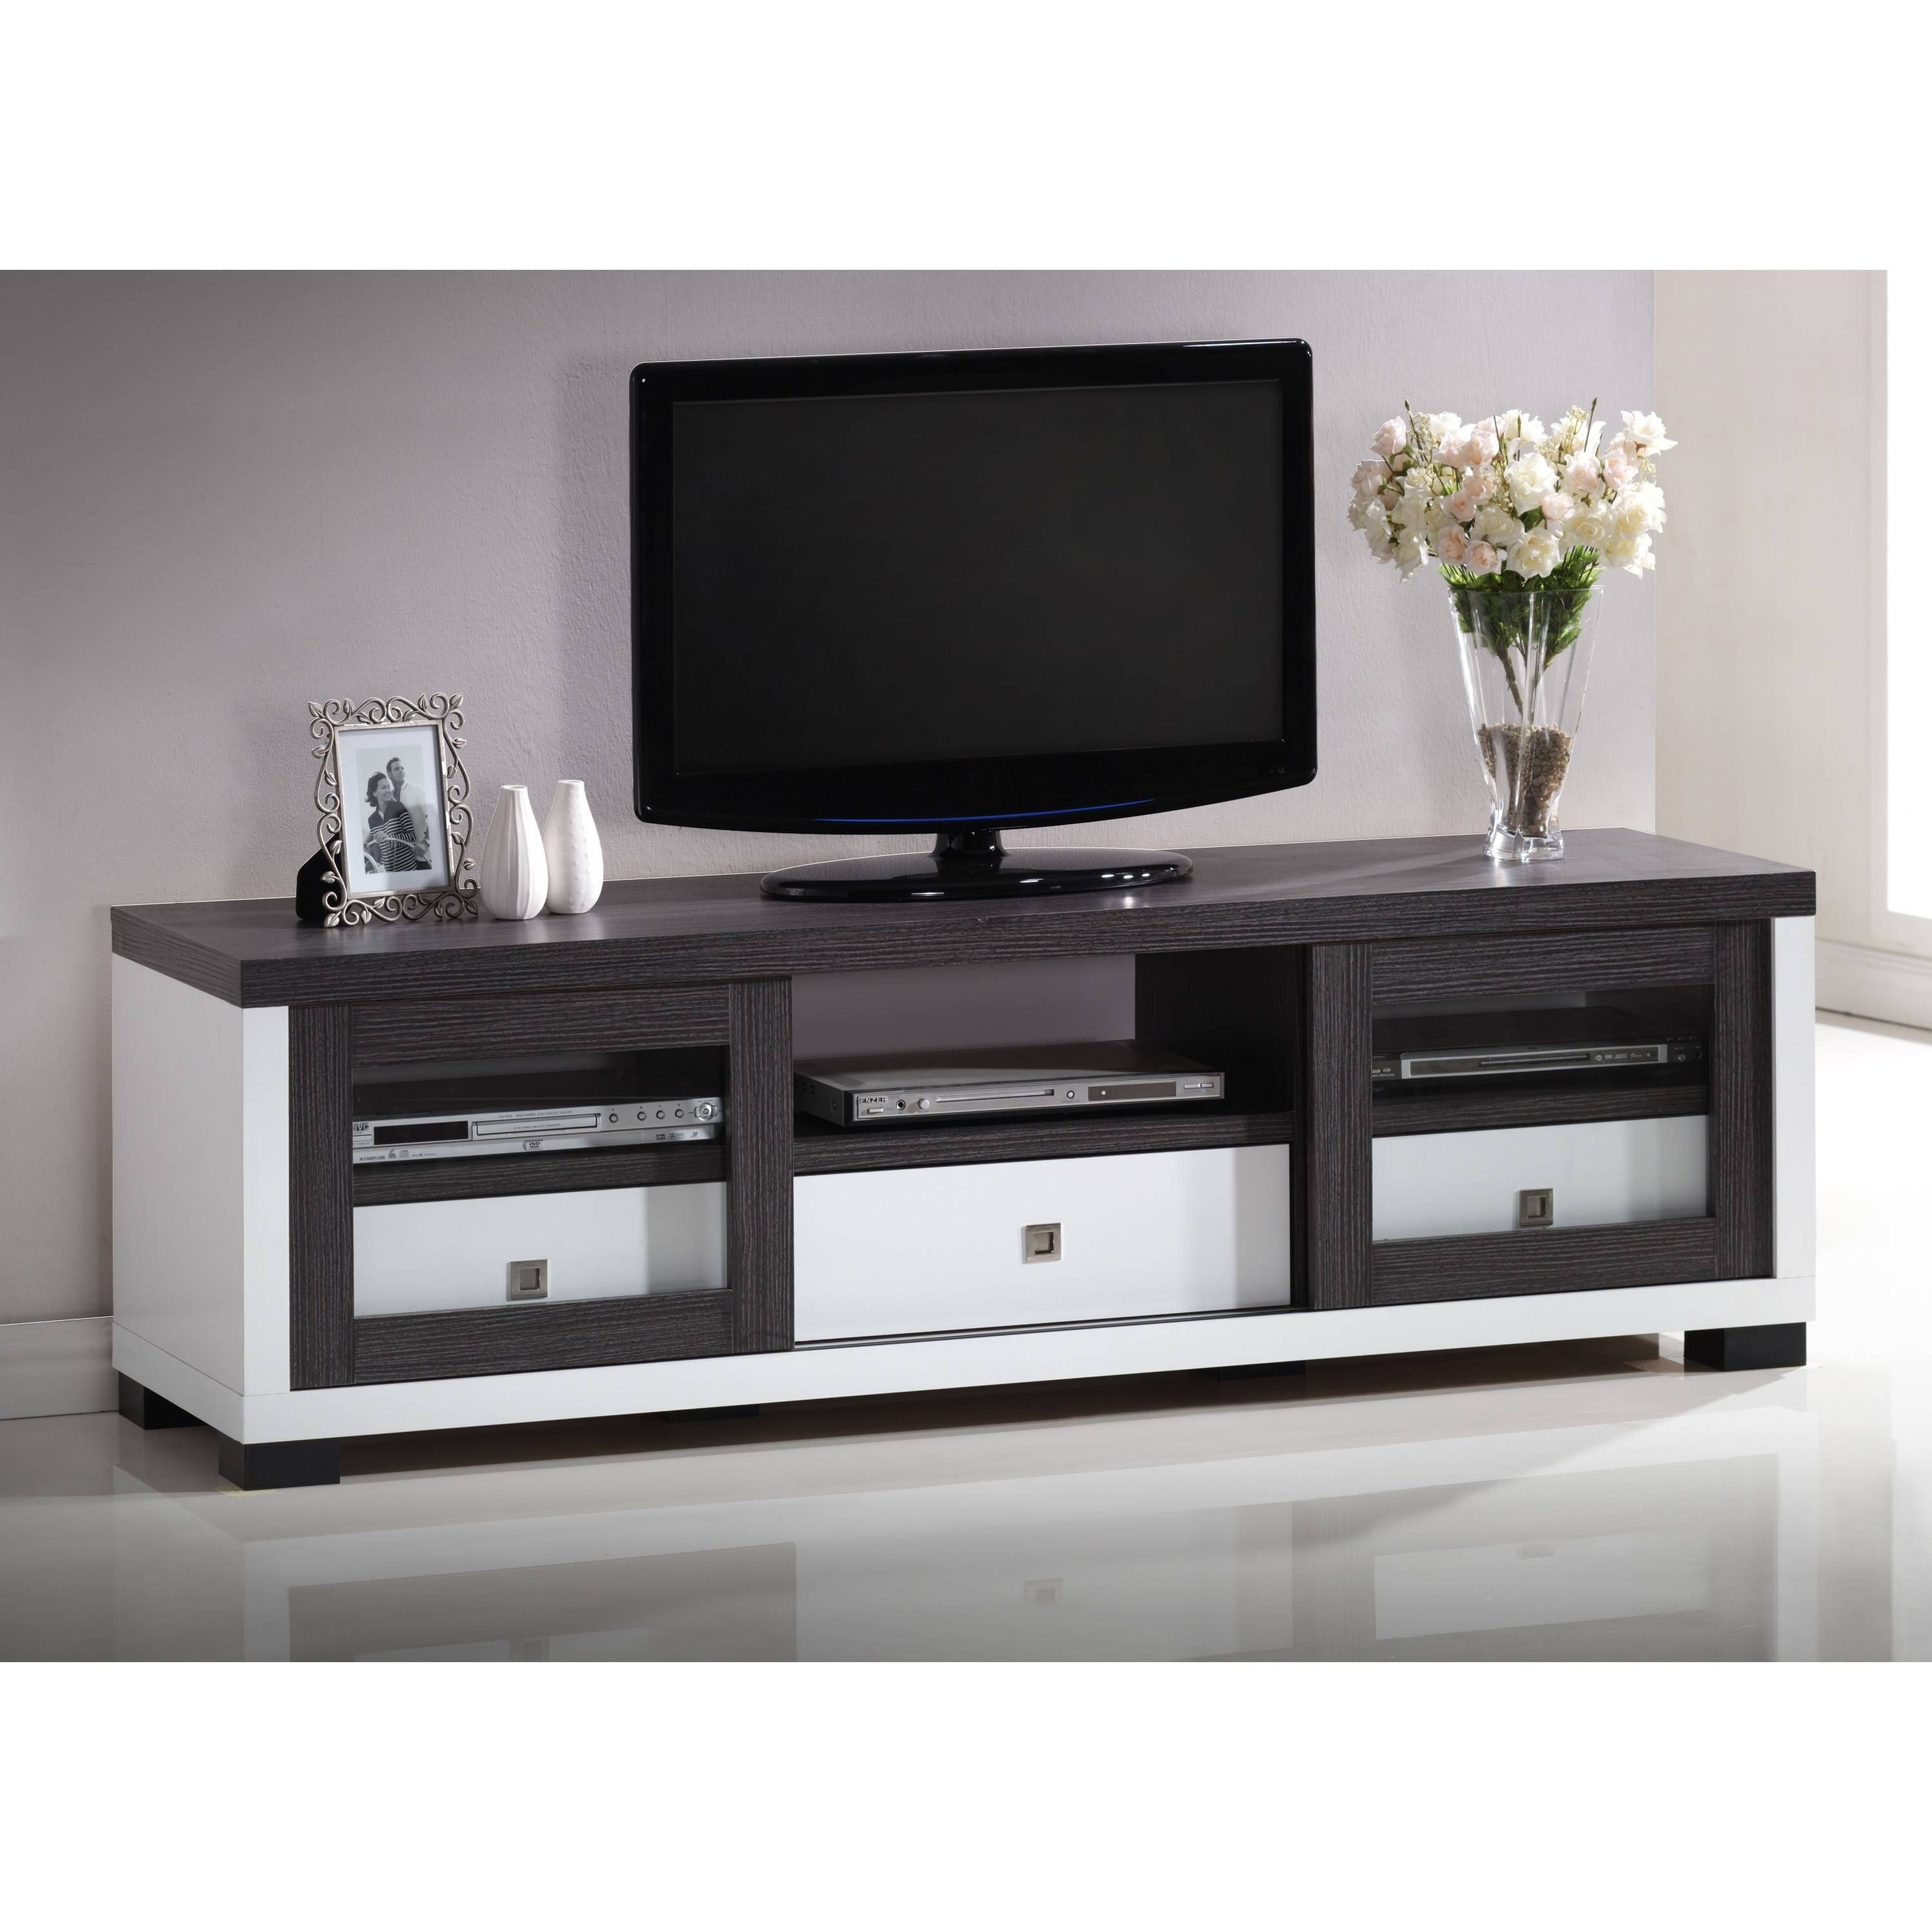 Long Short Black And White Tv Stand With Glass Doors Plus Drawer For Black Tv Cabinets With Drawers (View 7 of 15)